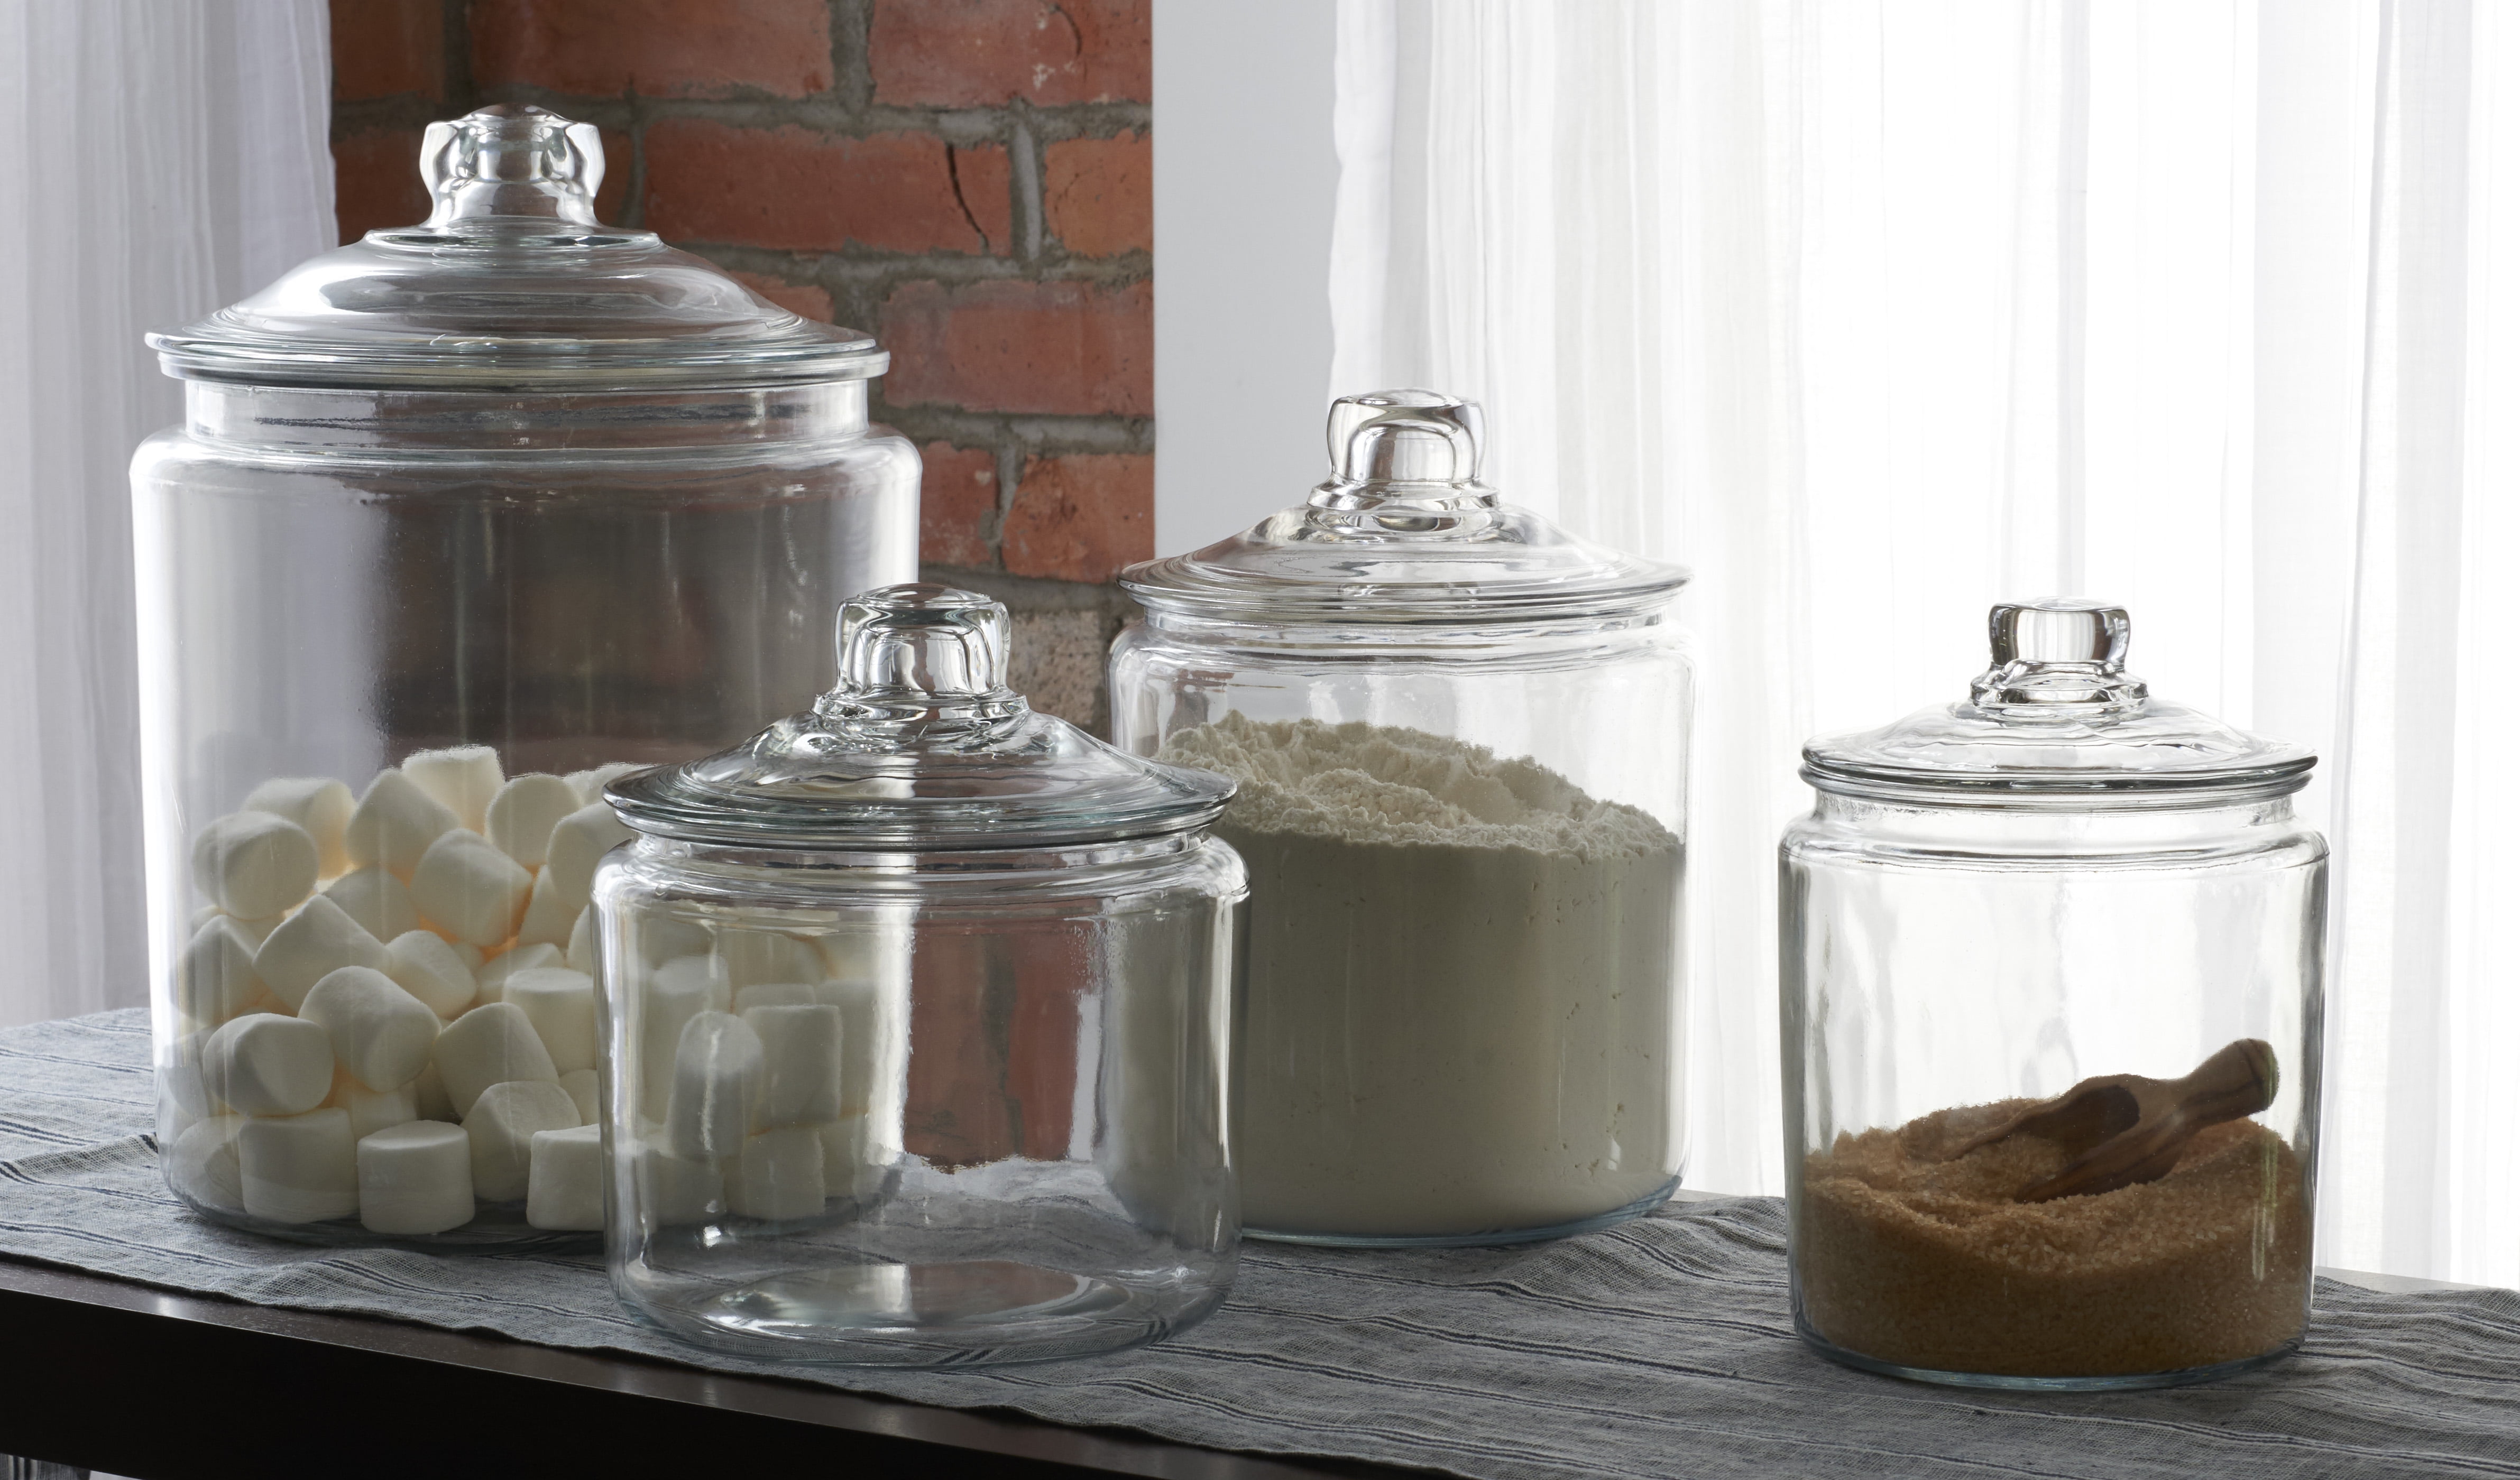 & 1/4Gallon Glass Cookie Jar -2x 1/2 Gallon - Glass Apothecary Jars With Lids Sugar Containers For Countertop 32oz Canister Sets For Kitchen Counter 64oz Glass Candy Jars Glass Canisters Set Of 4 